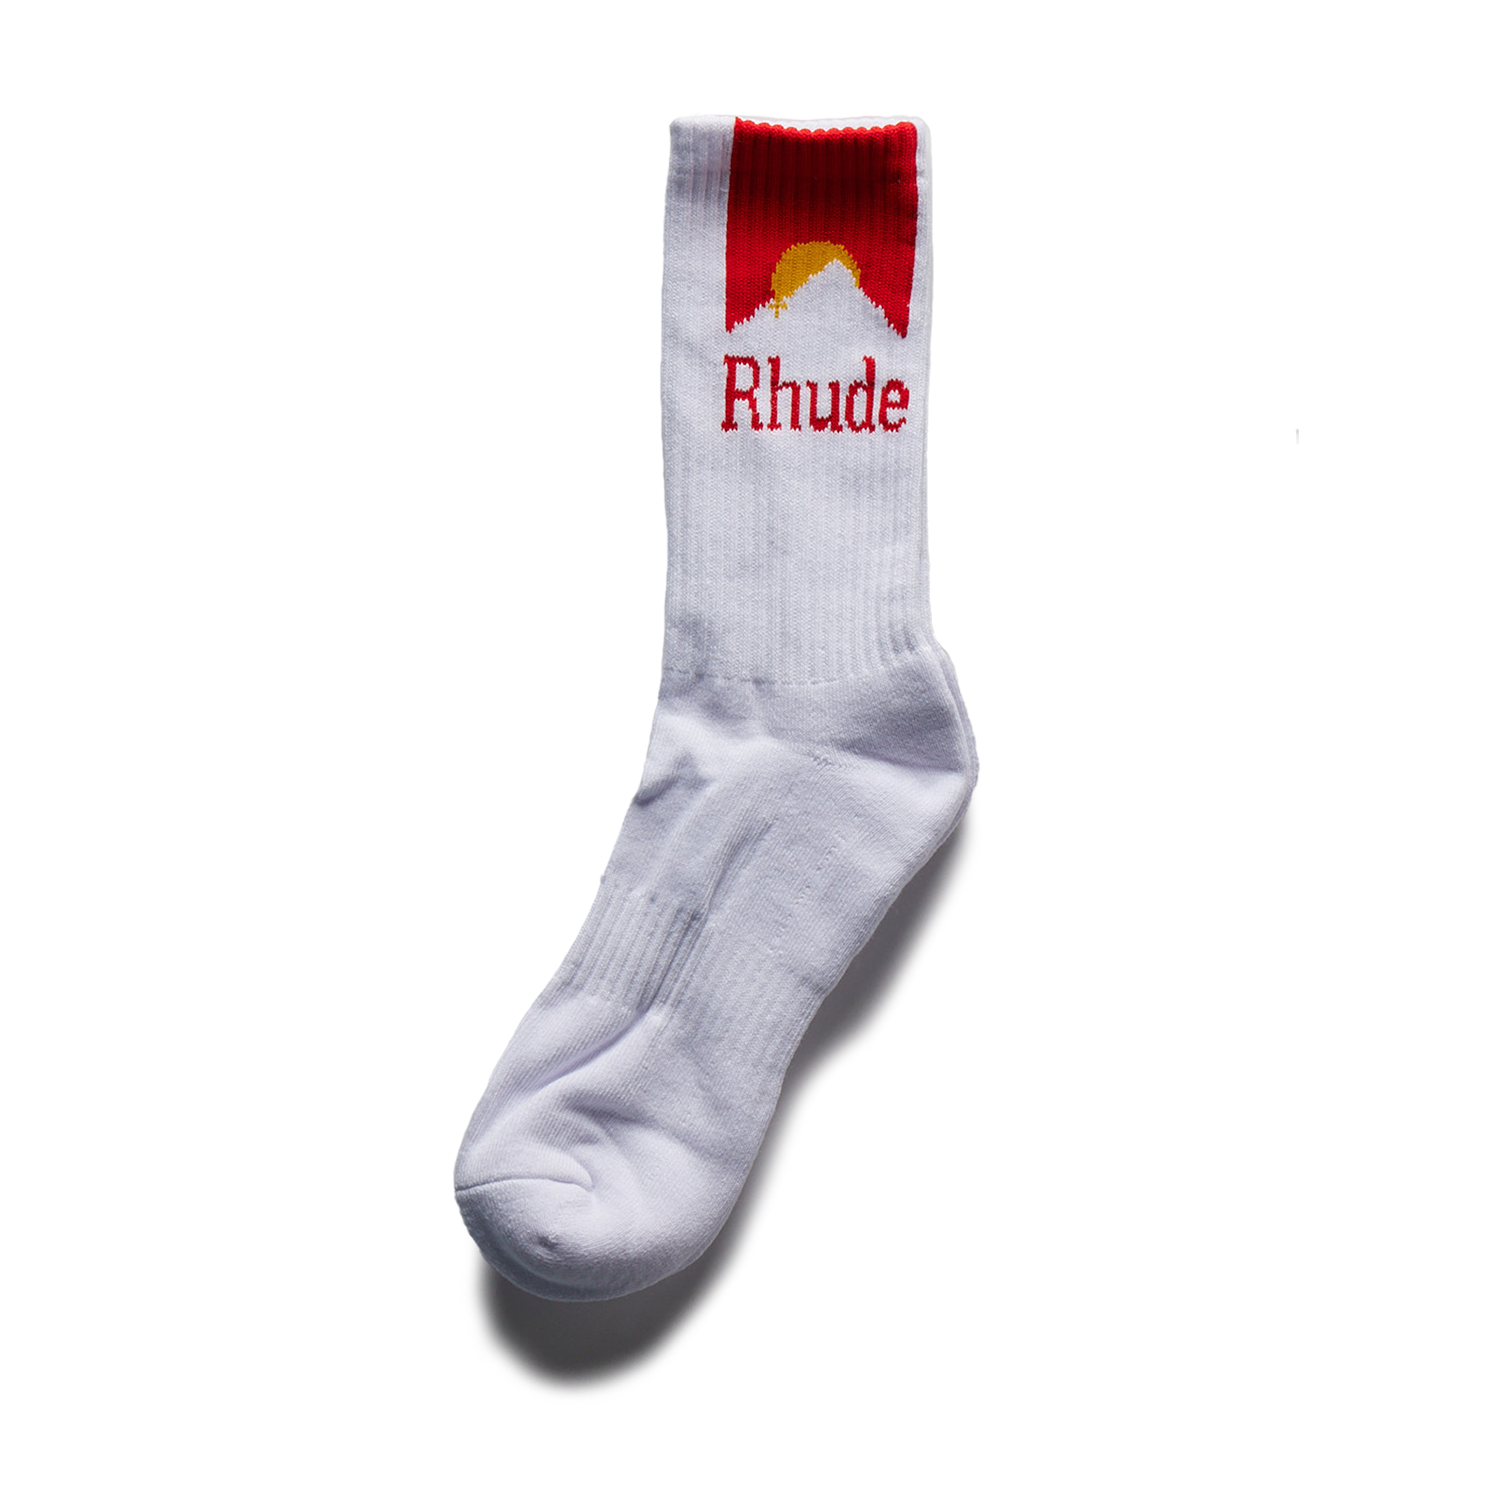 RHUDE - Moonlight Sock (White/Red/Yellow) product image